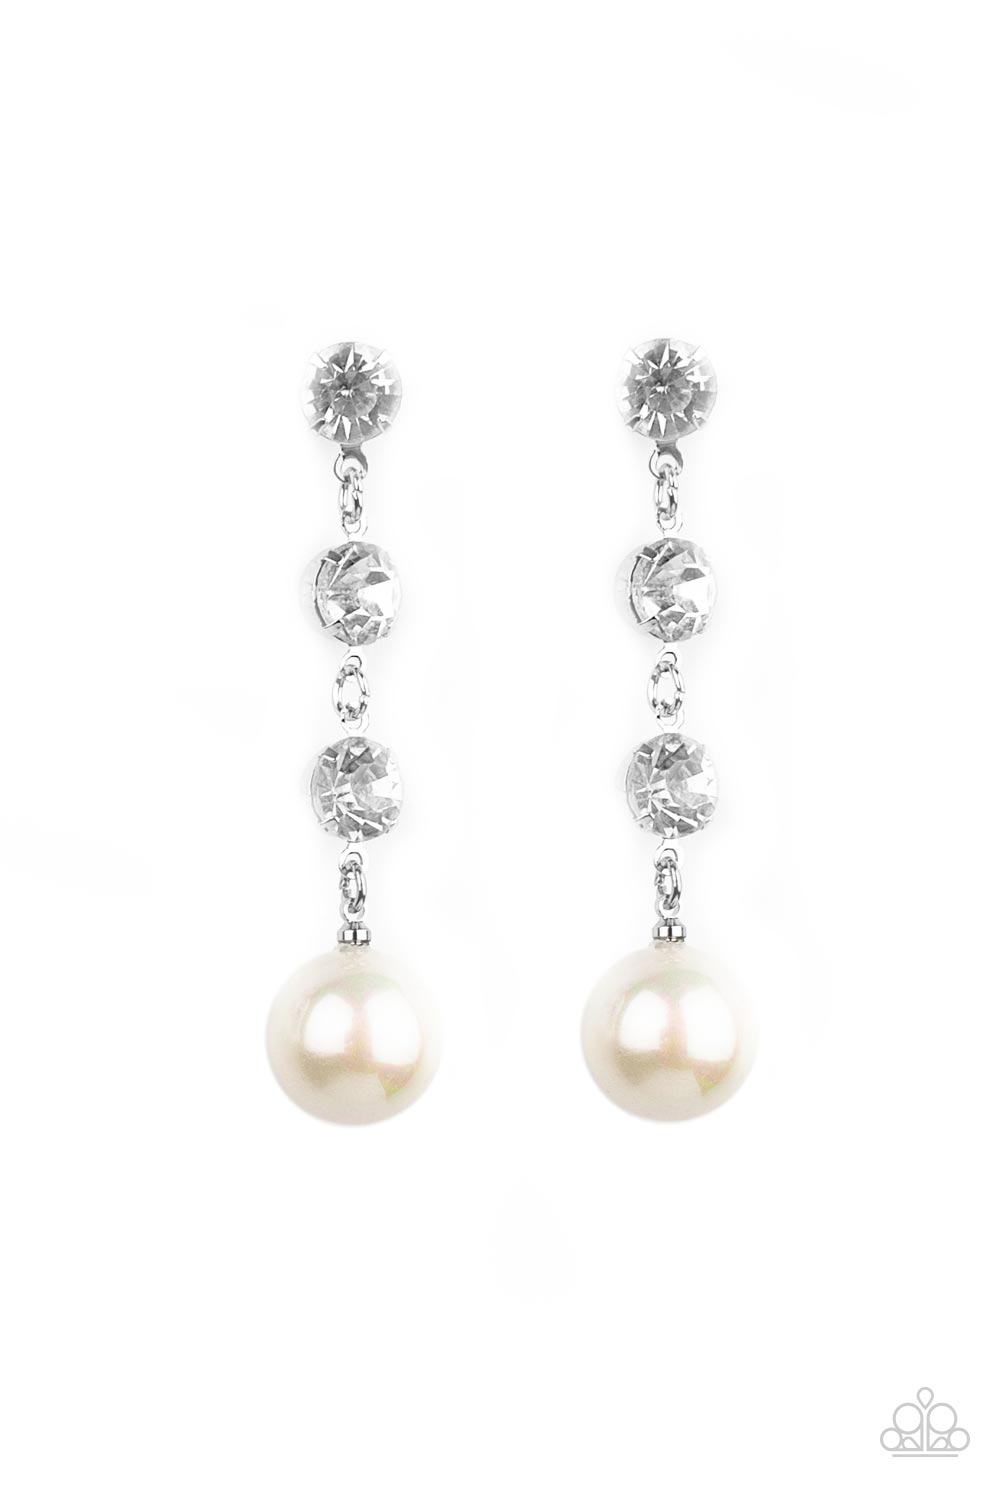 Yacht Scene White Pearl Earring - Paparazzi Accessories  Encased in sleek silver fittings, a trio of classic white rhinestones give way to an oversized iridescent pearl, creating an elegantly extended chandelier. Earring attaches to a standard post fitting.  All Paparazzi Accessories are lead free and nickel free!  Sold as one pair of post earrings.